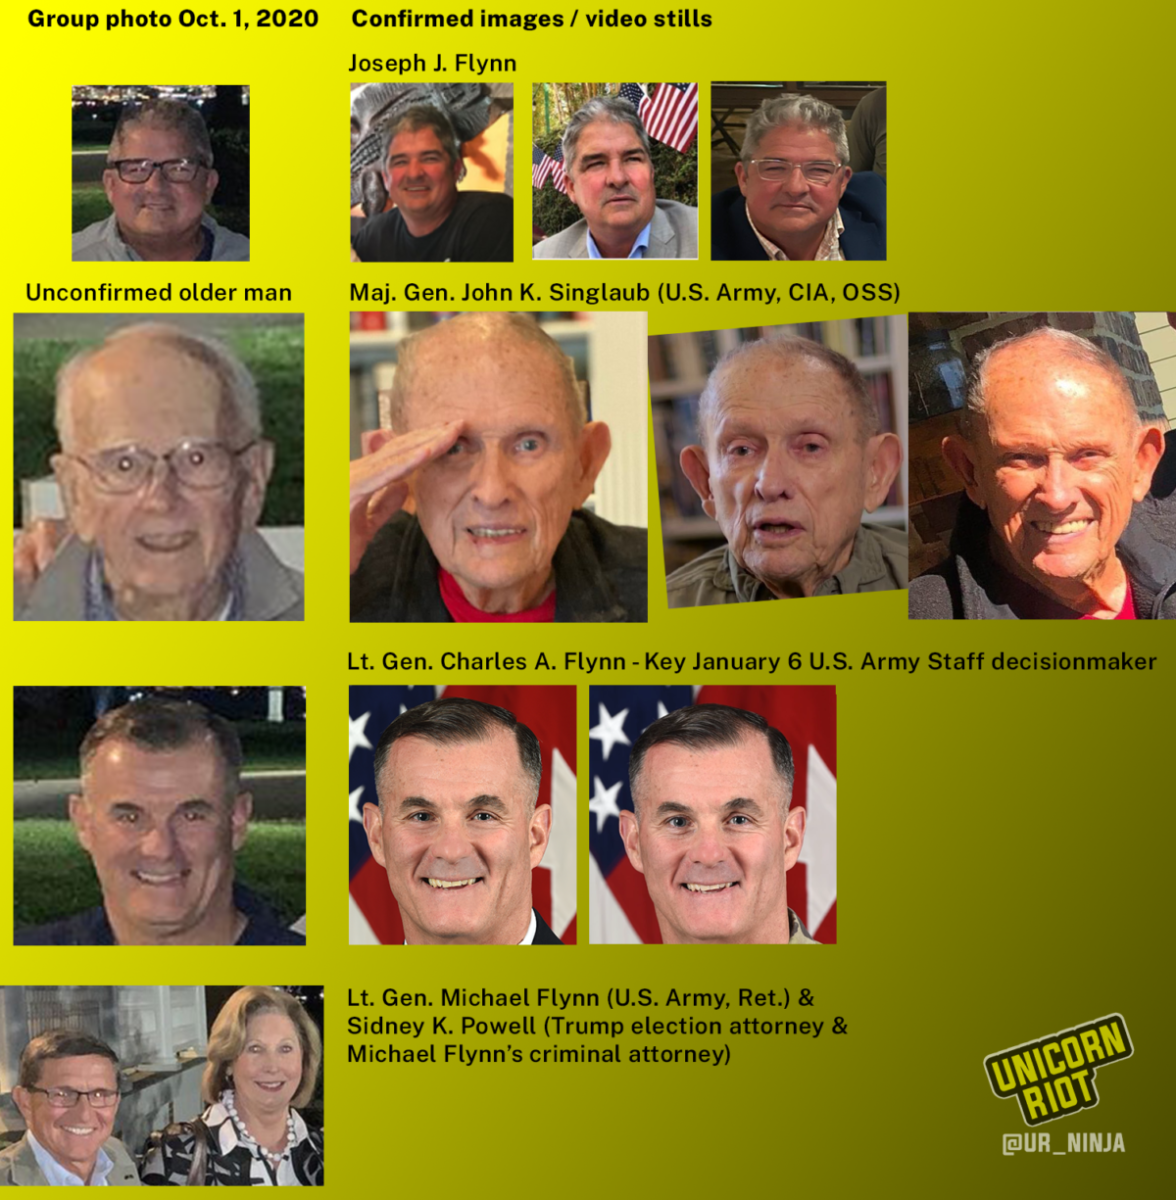 Unicorn Riot photo comparison of Joseph J. Flynn, the unconfirmed older man, Maj. Gen John. K Singlaub, Lt. Gen. Charles A Flynn, Lt. Gen. Michael Flynn and Sidney Powell. At left are sections of the photo published by Joseph Flynn on Twitter October 1, 2020, later deleted. (Click for high-resolution version)